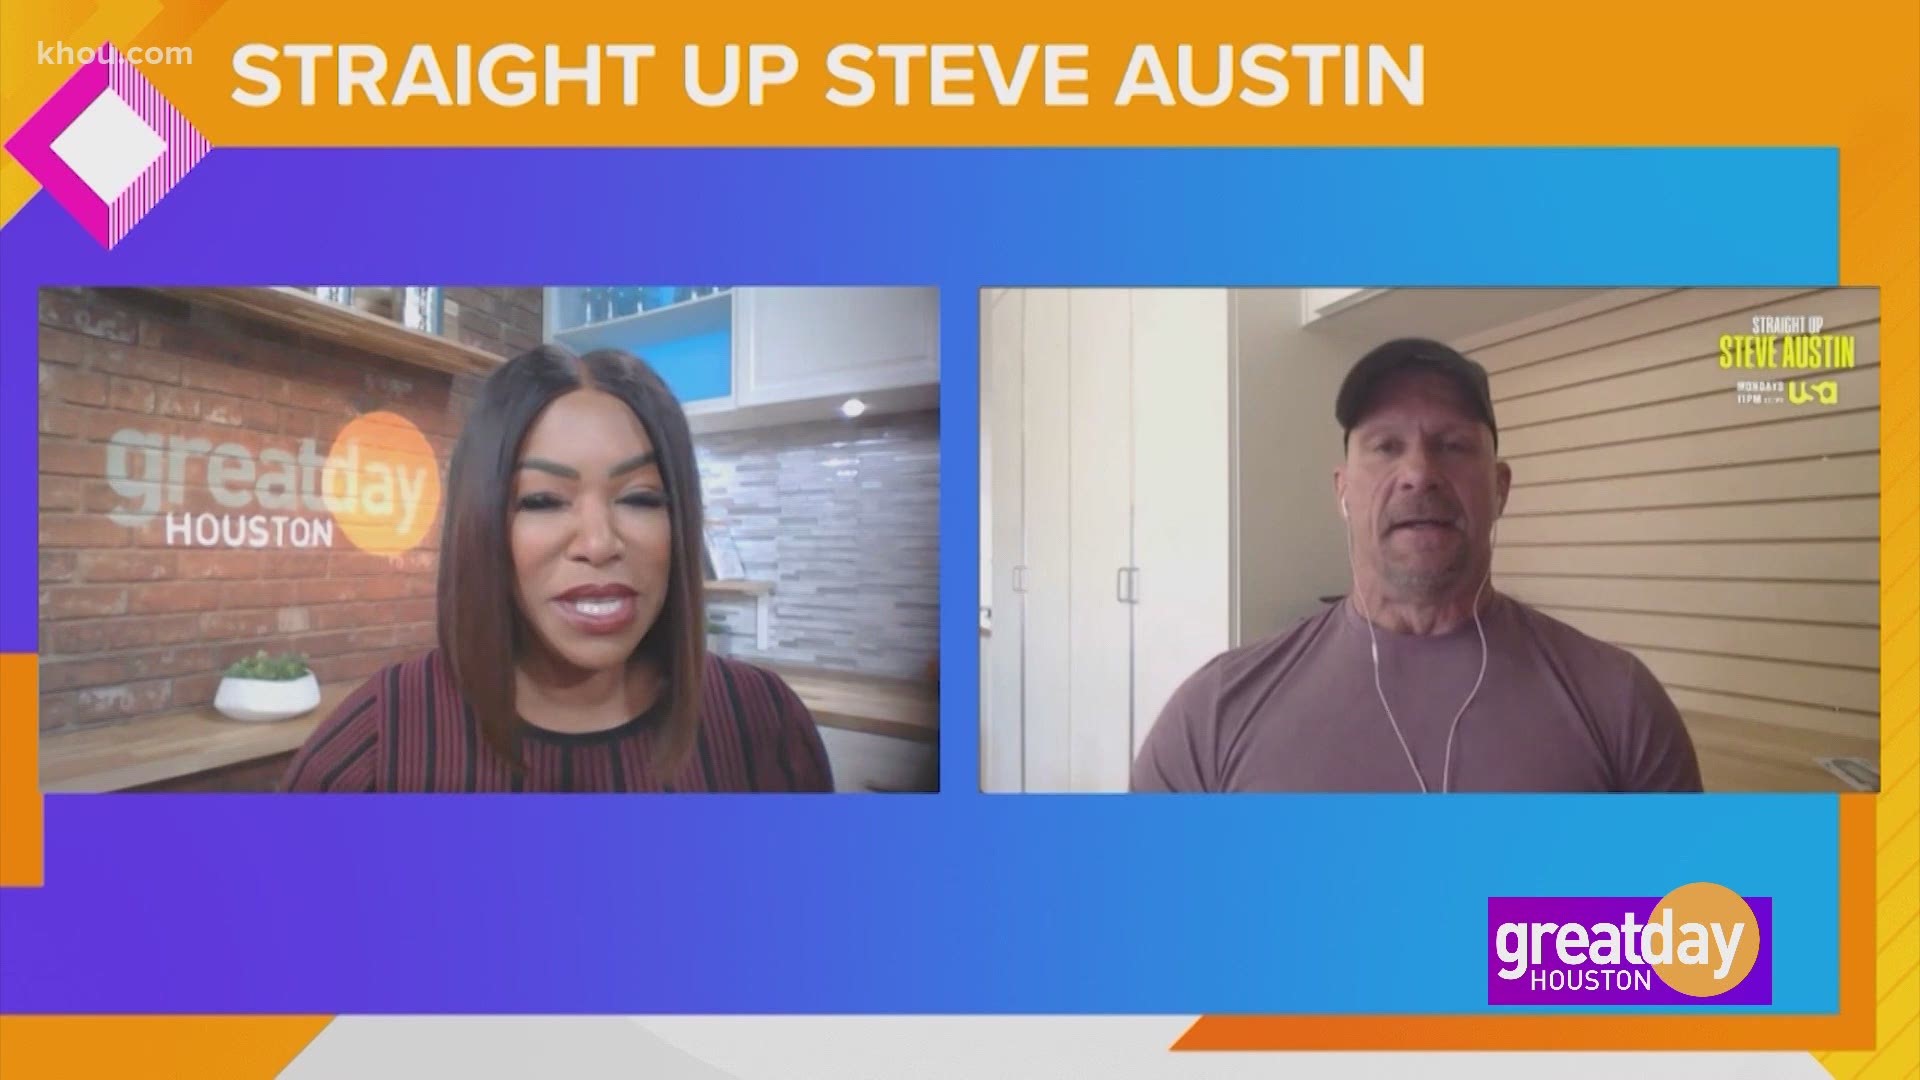 Catch season 2 new episodes of "Straight Up Steve Austin" on the USA Network